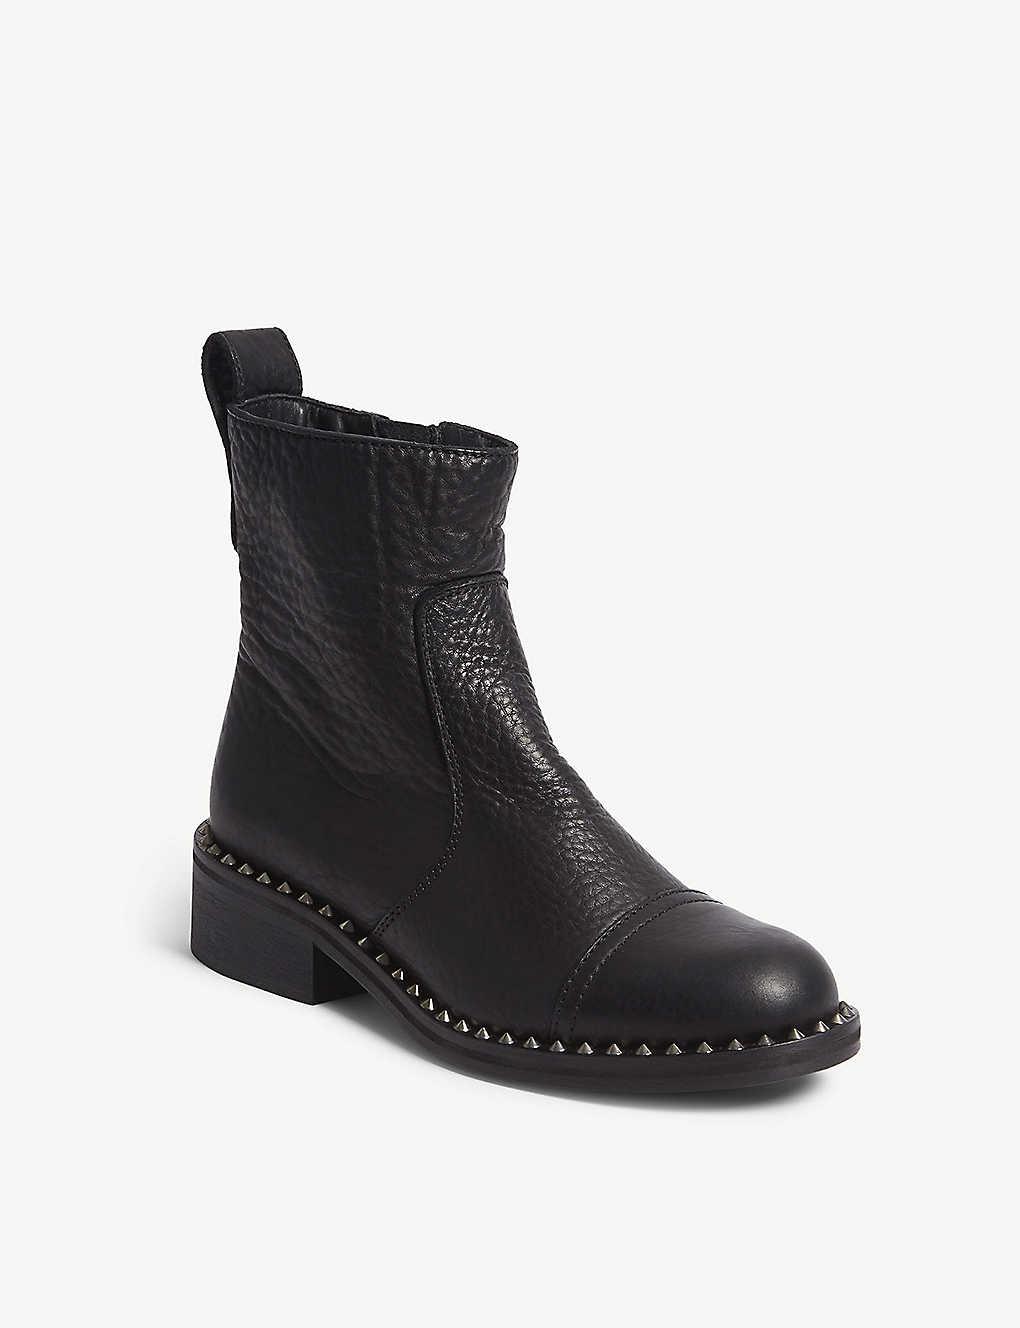 Zadig & Voltaire Empress Clous Studded Leather Ankle Boots in Black - Lyst